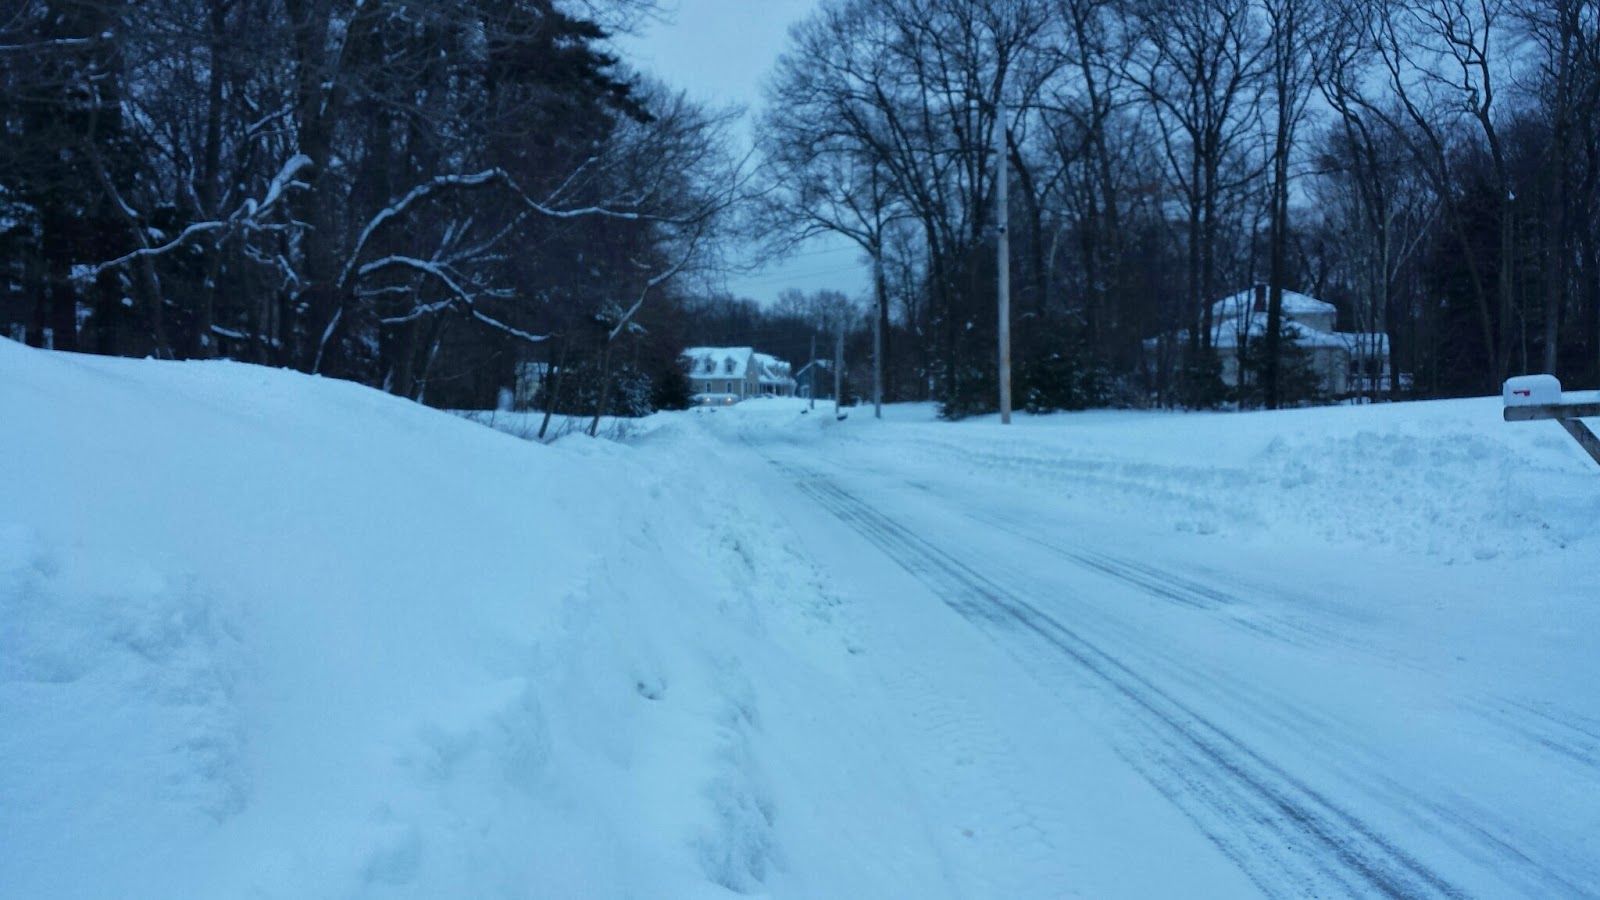 Lawrence Dr - snow covered but passable